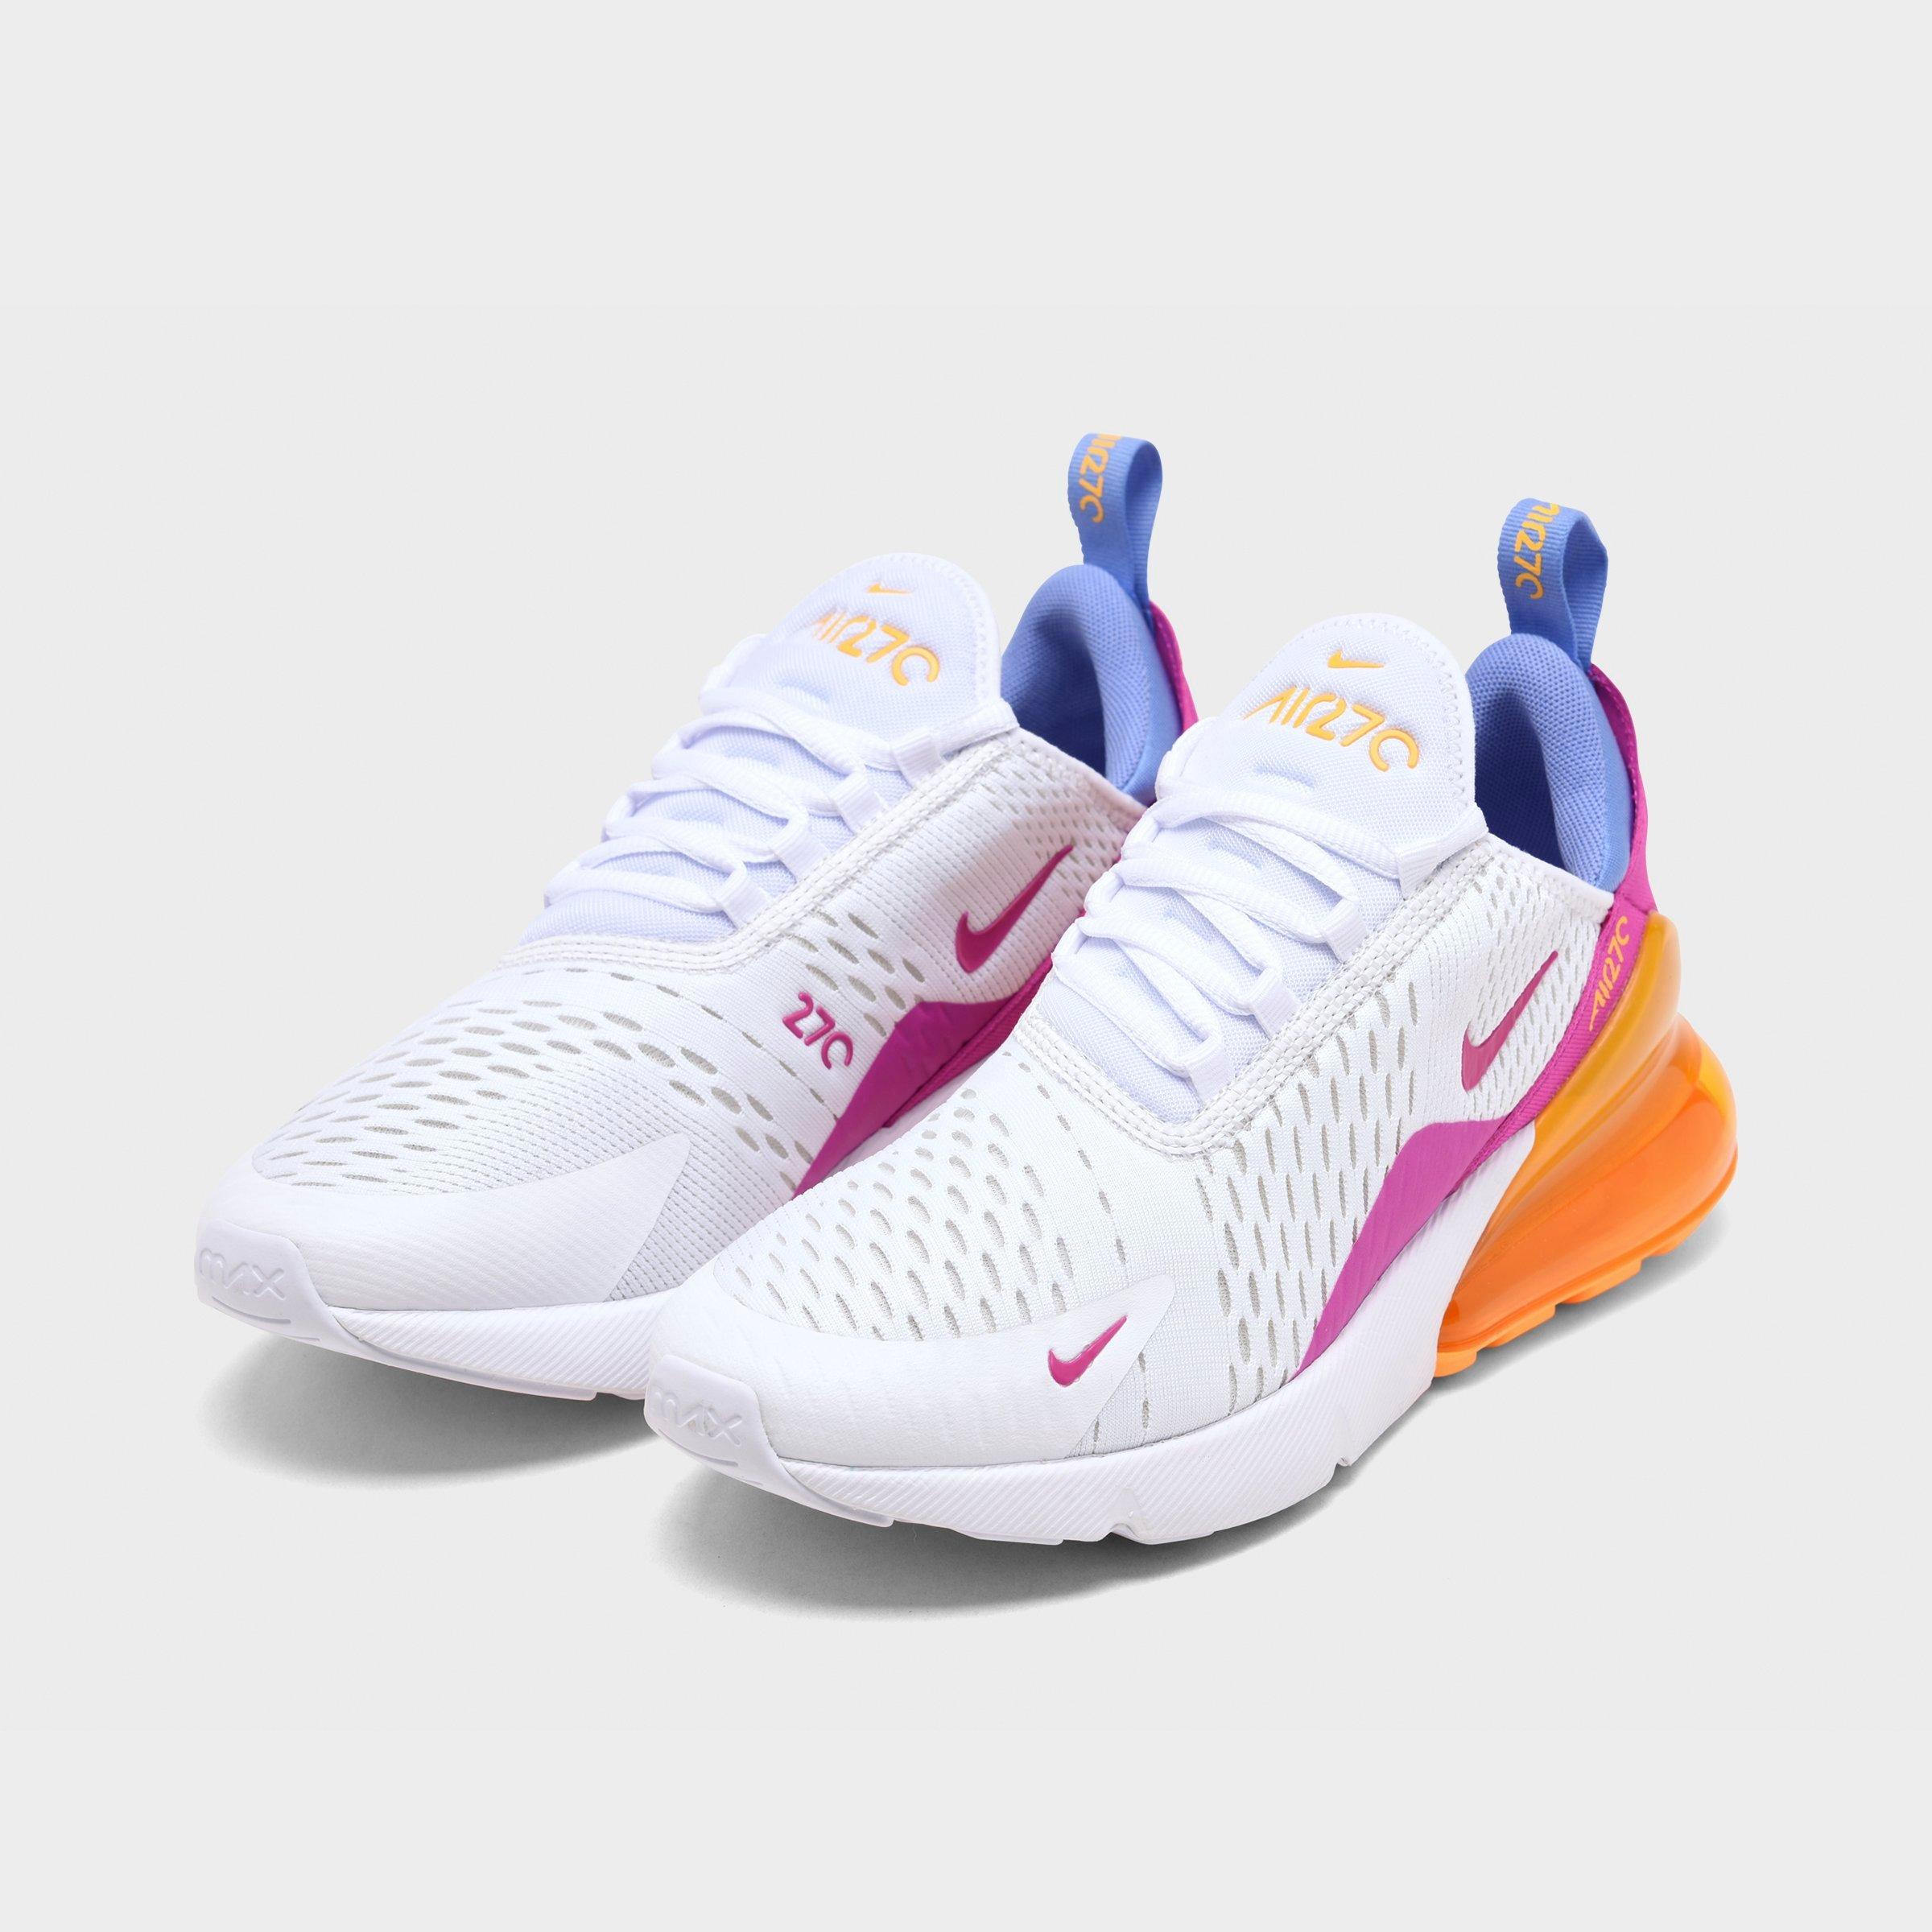 nike air max 270 womens pink and white